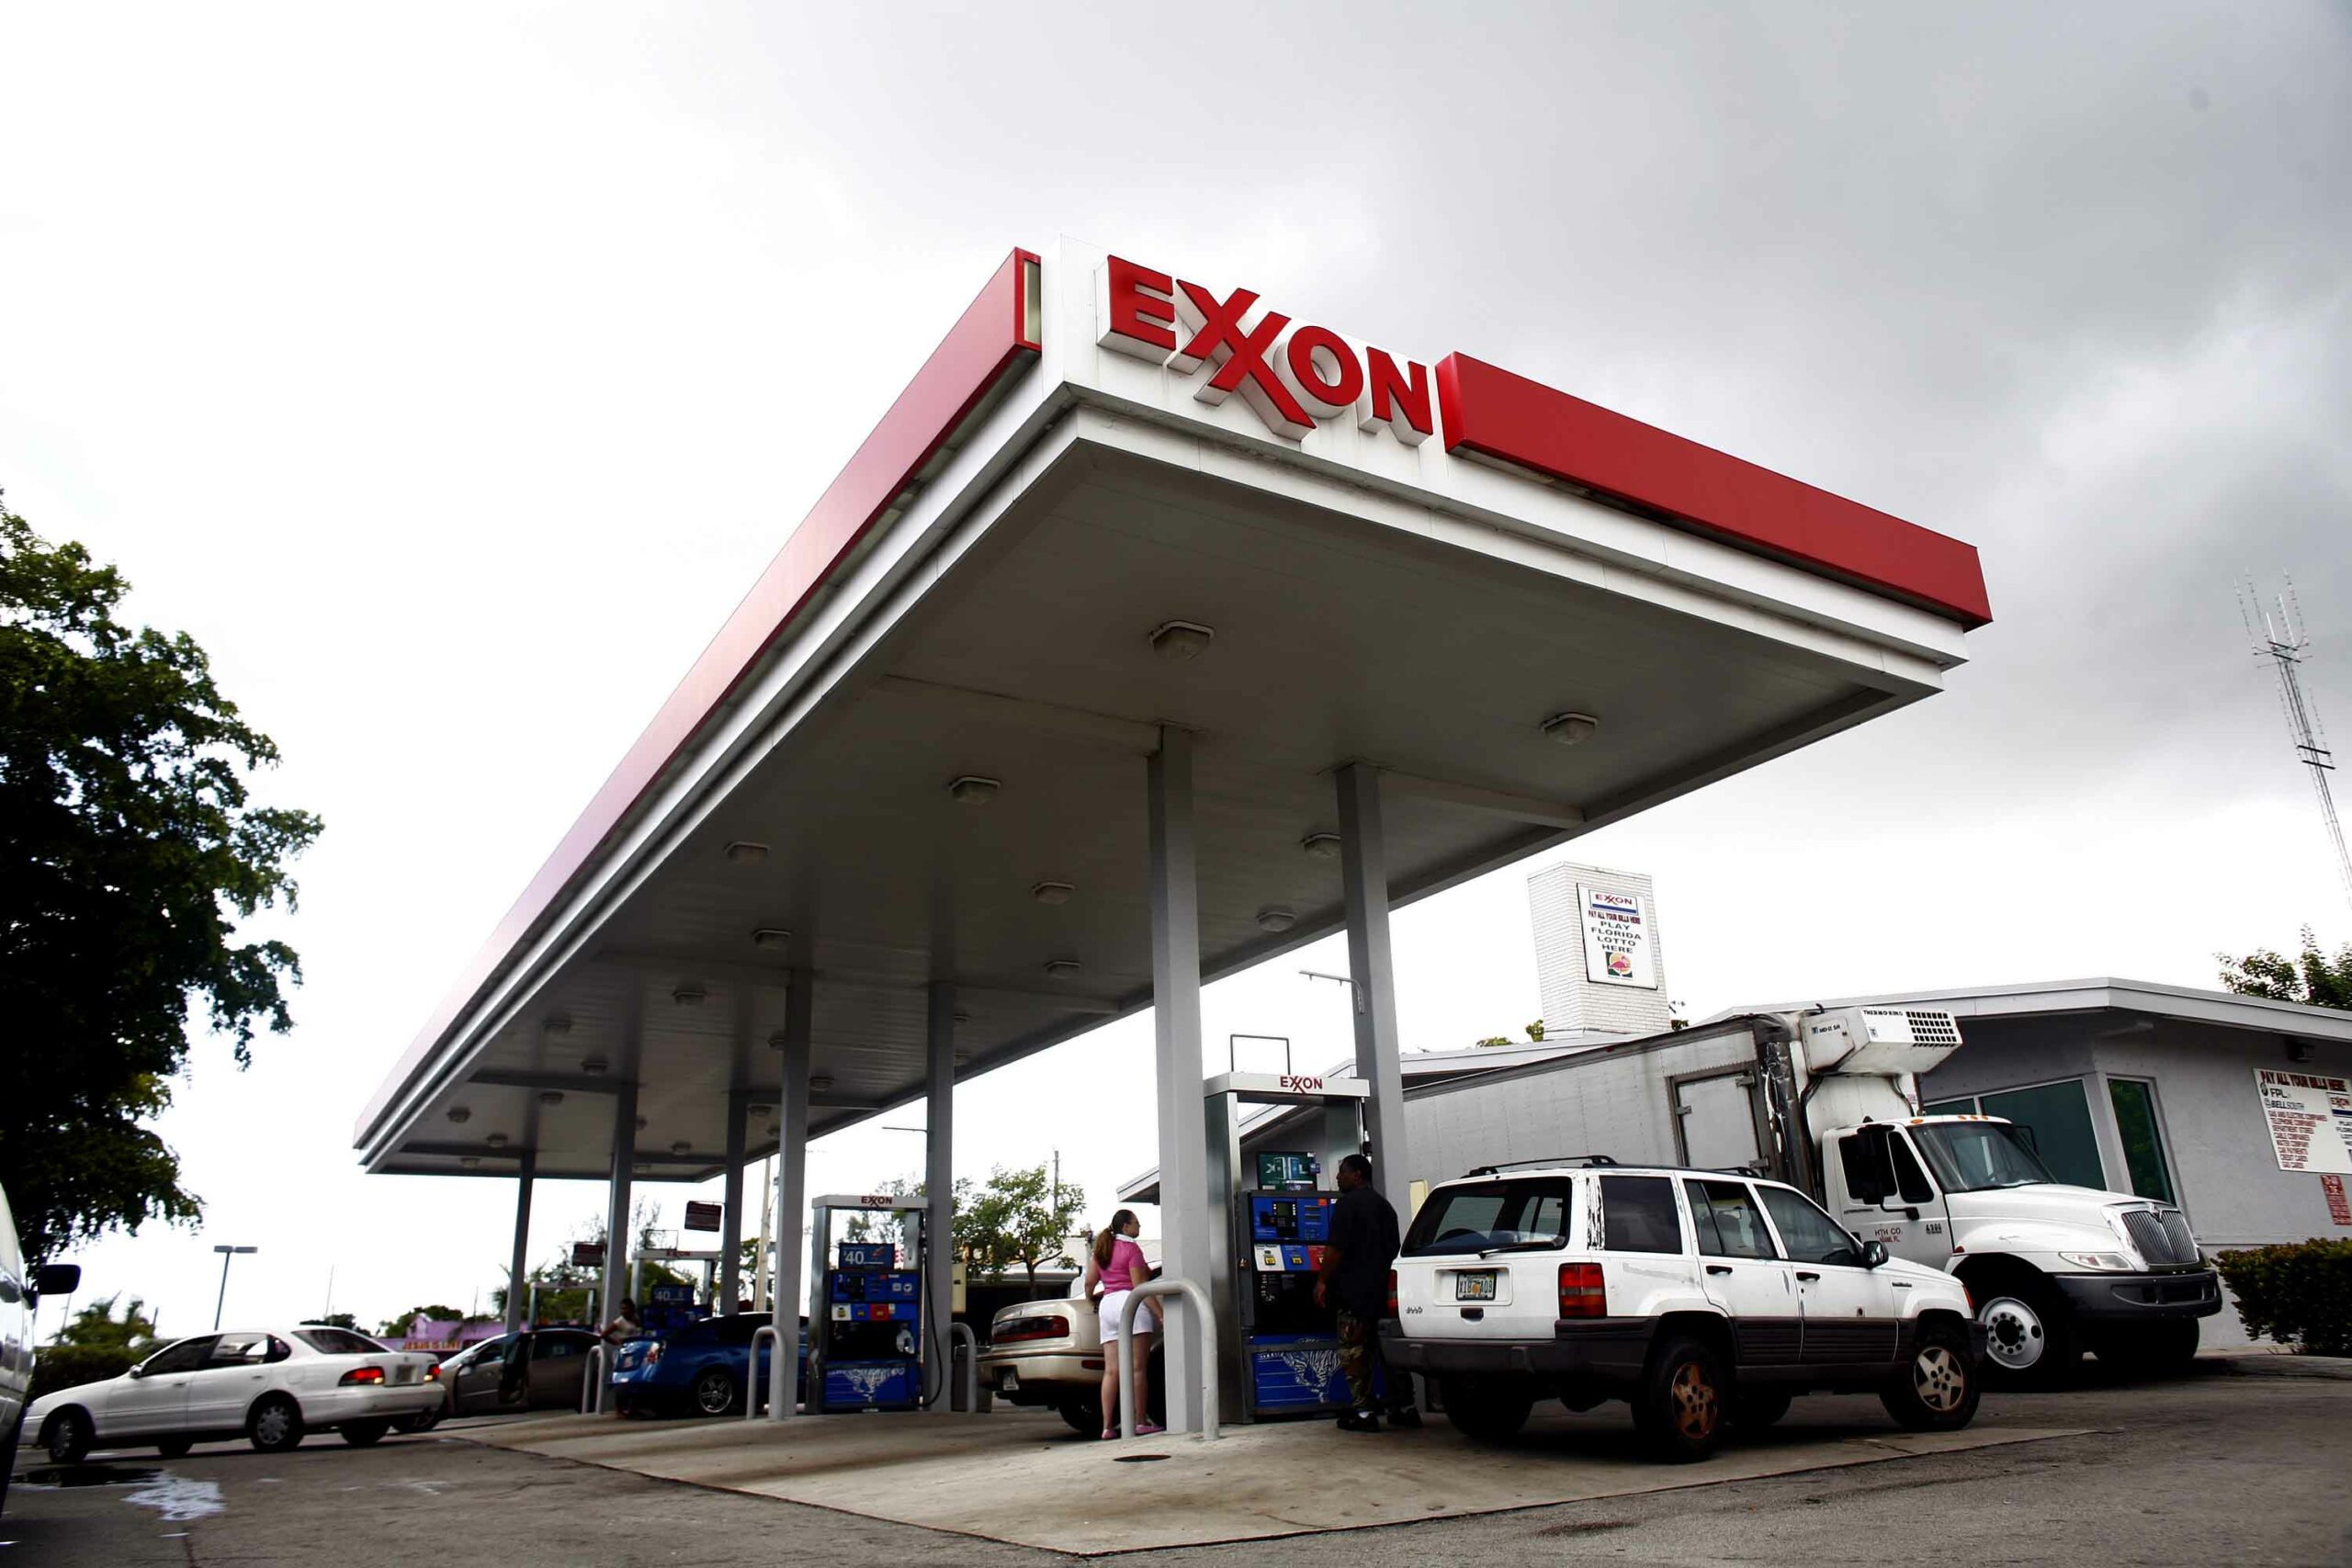 Local weather scientists take swipe at Exxon Mobil, business in leaked report